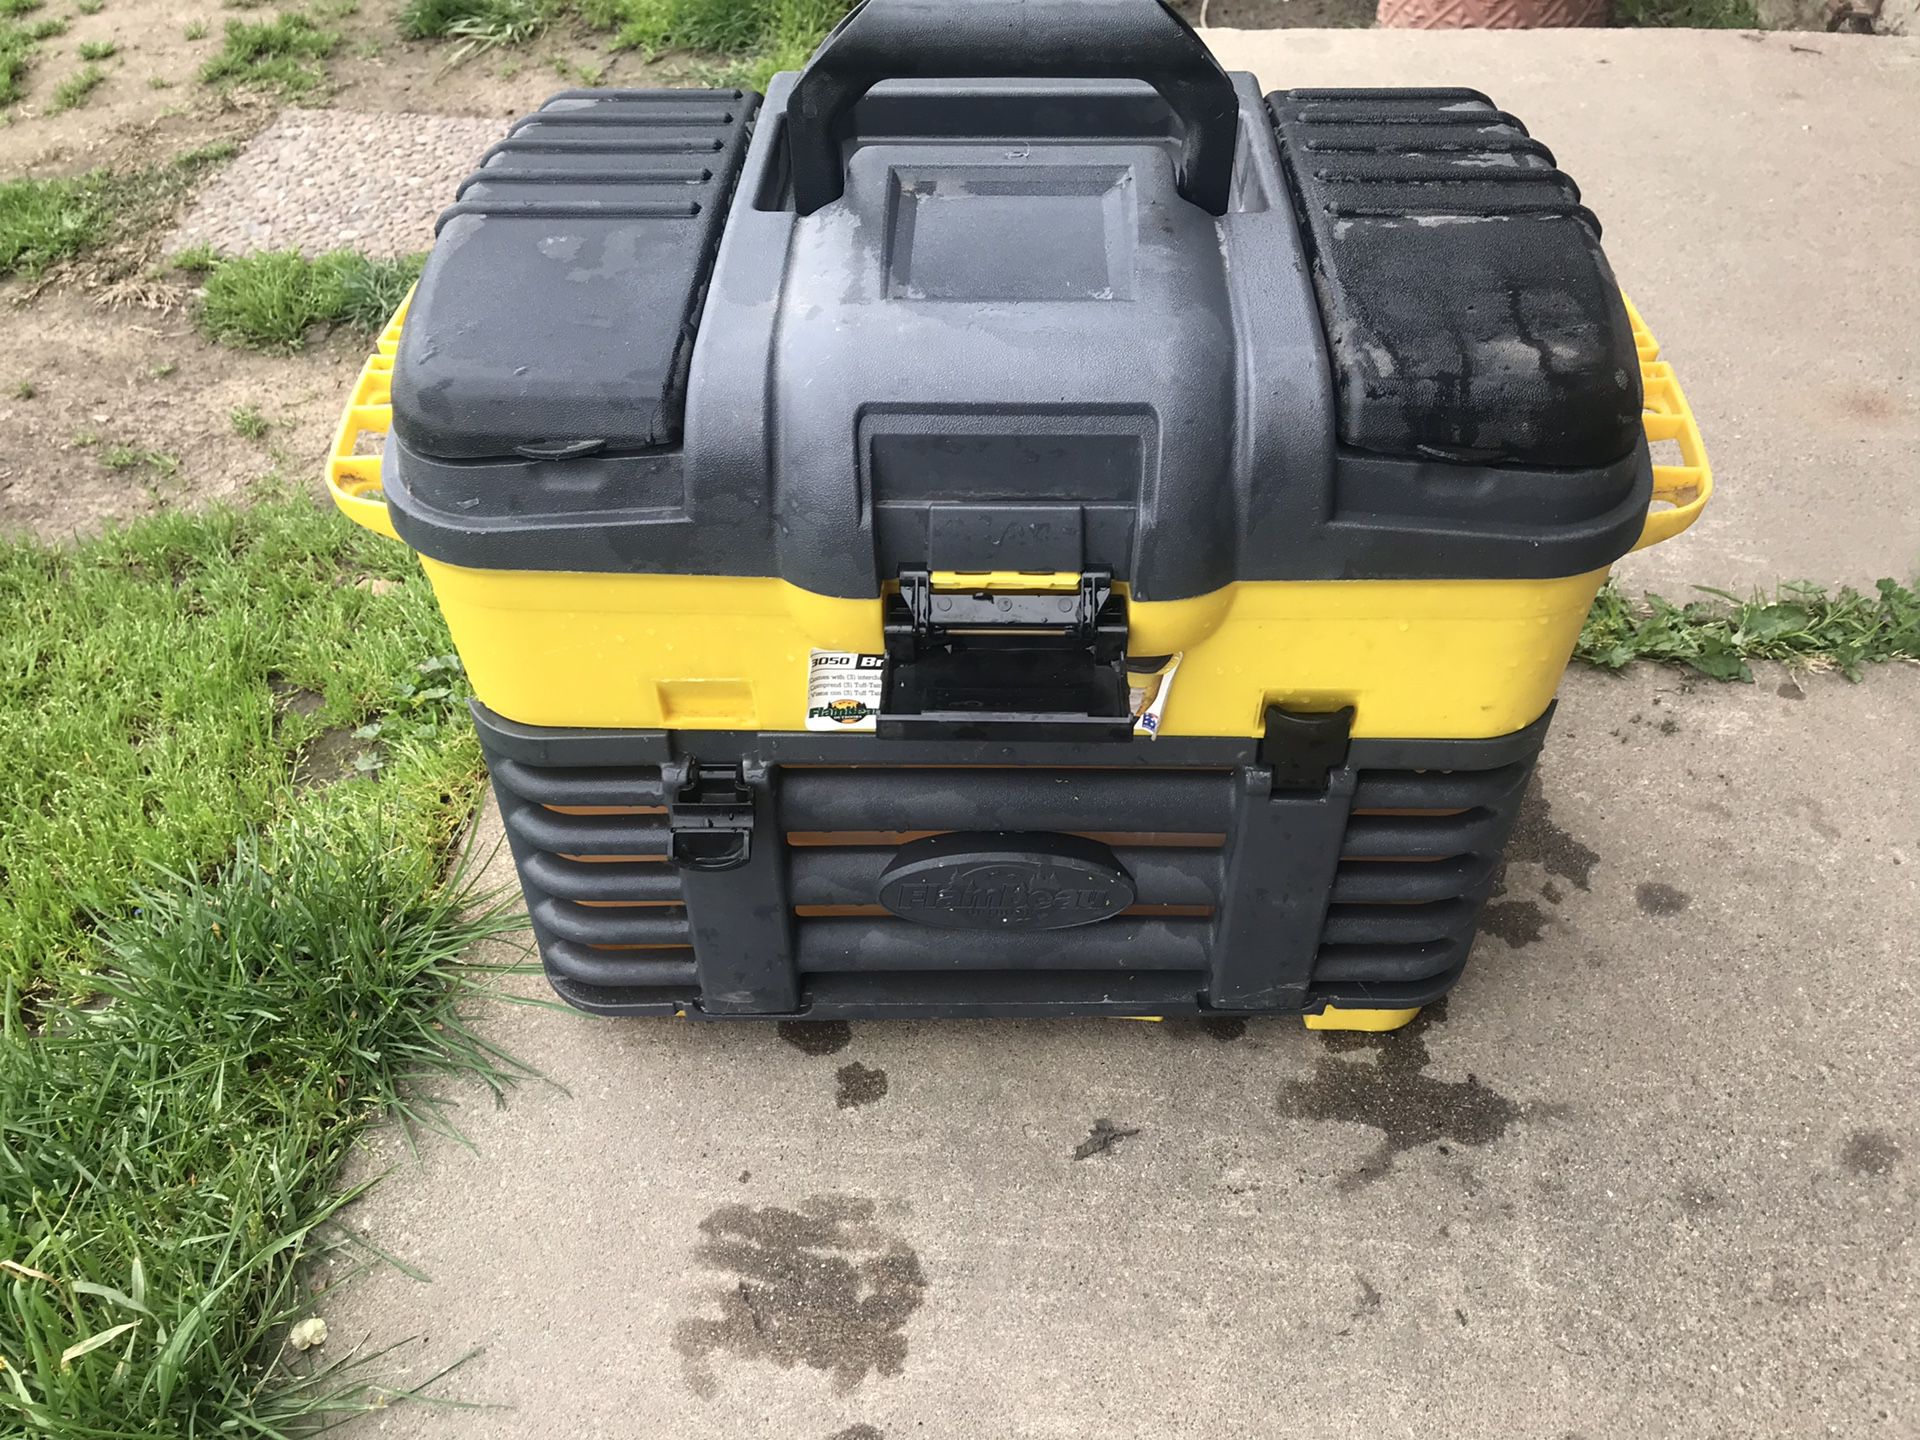 Portable tool box with lower drawers